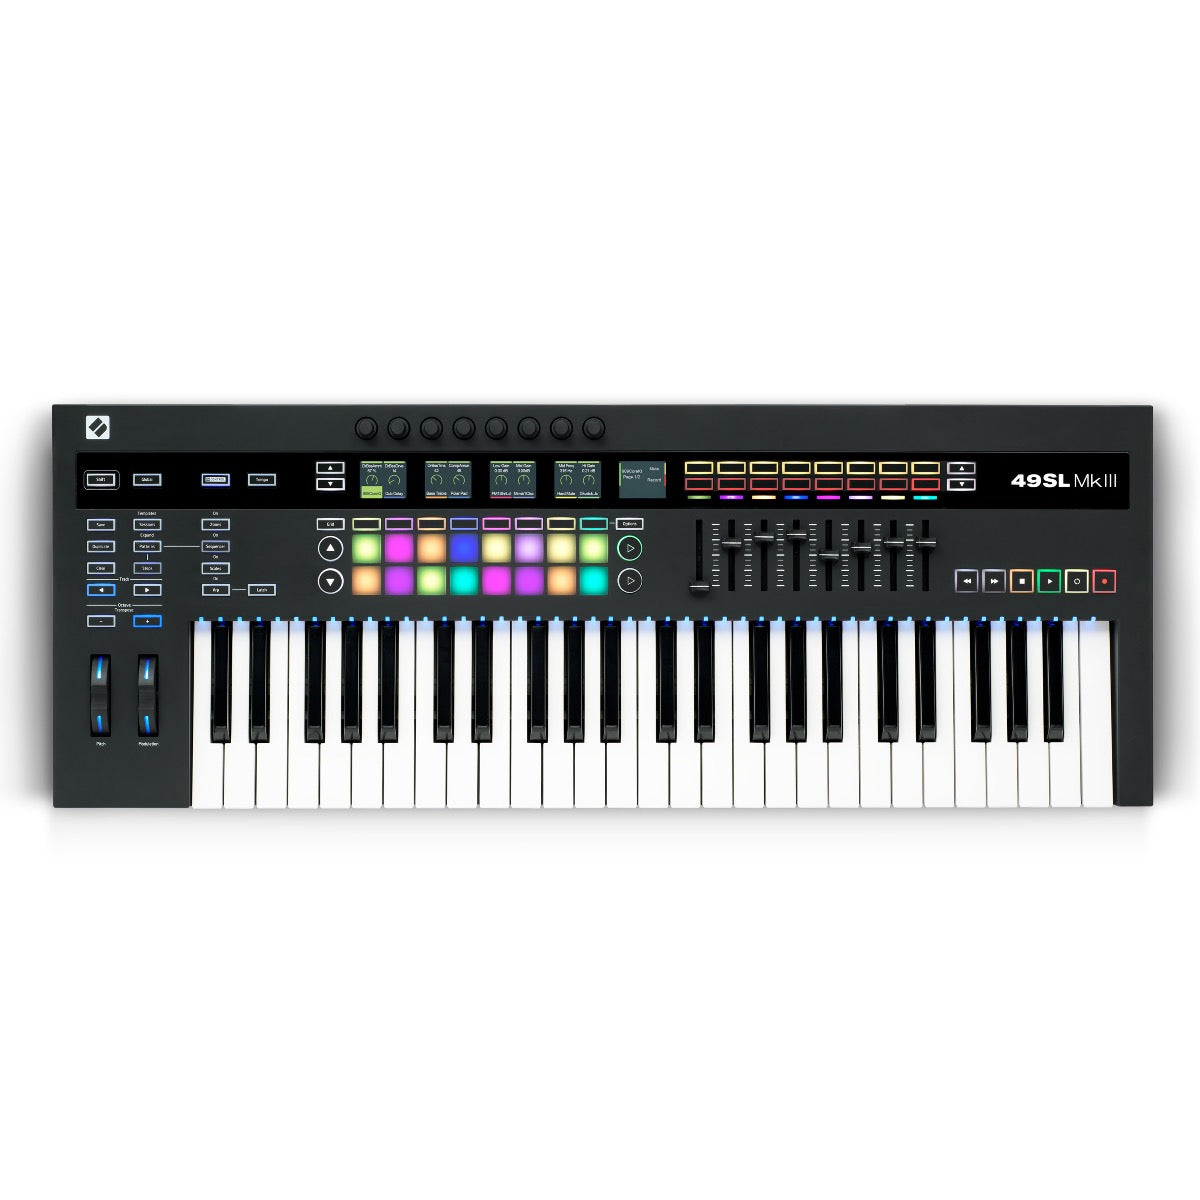 Top view of Novation 49SL MKIII Keyboard Controller and Sequencer